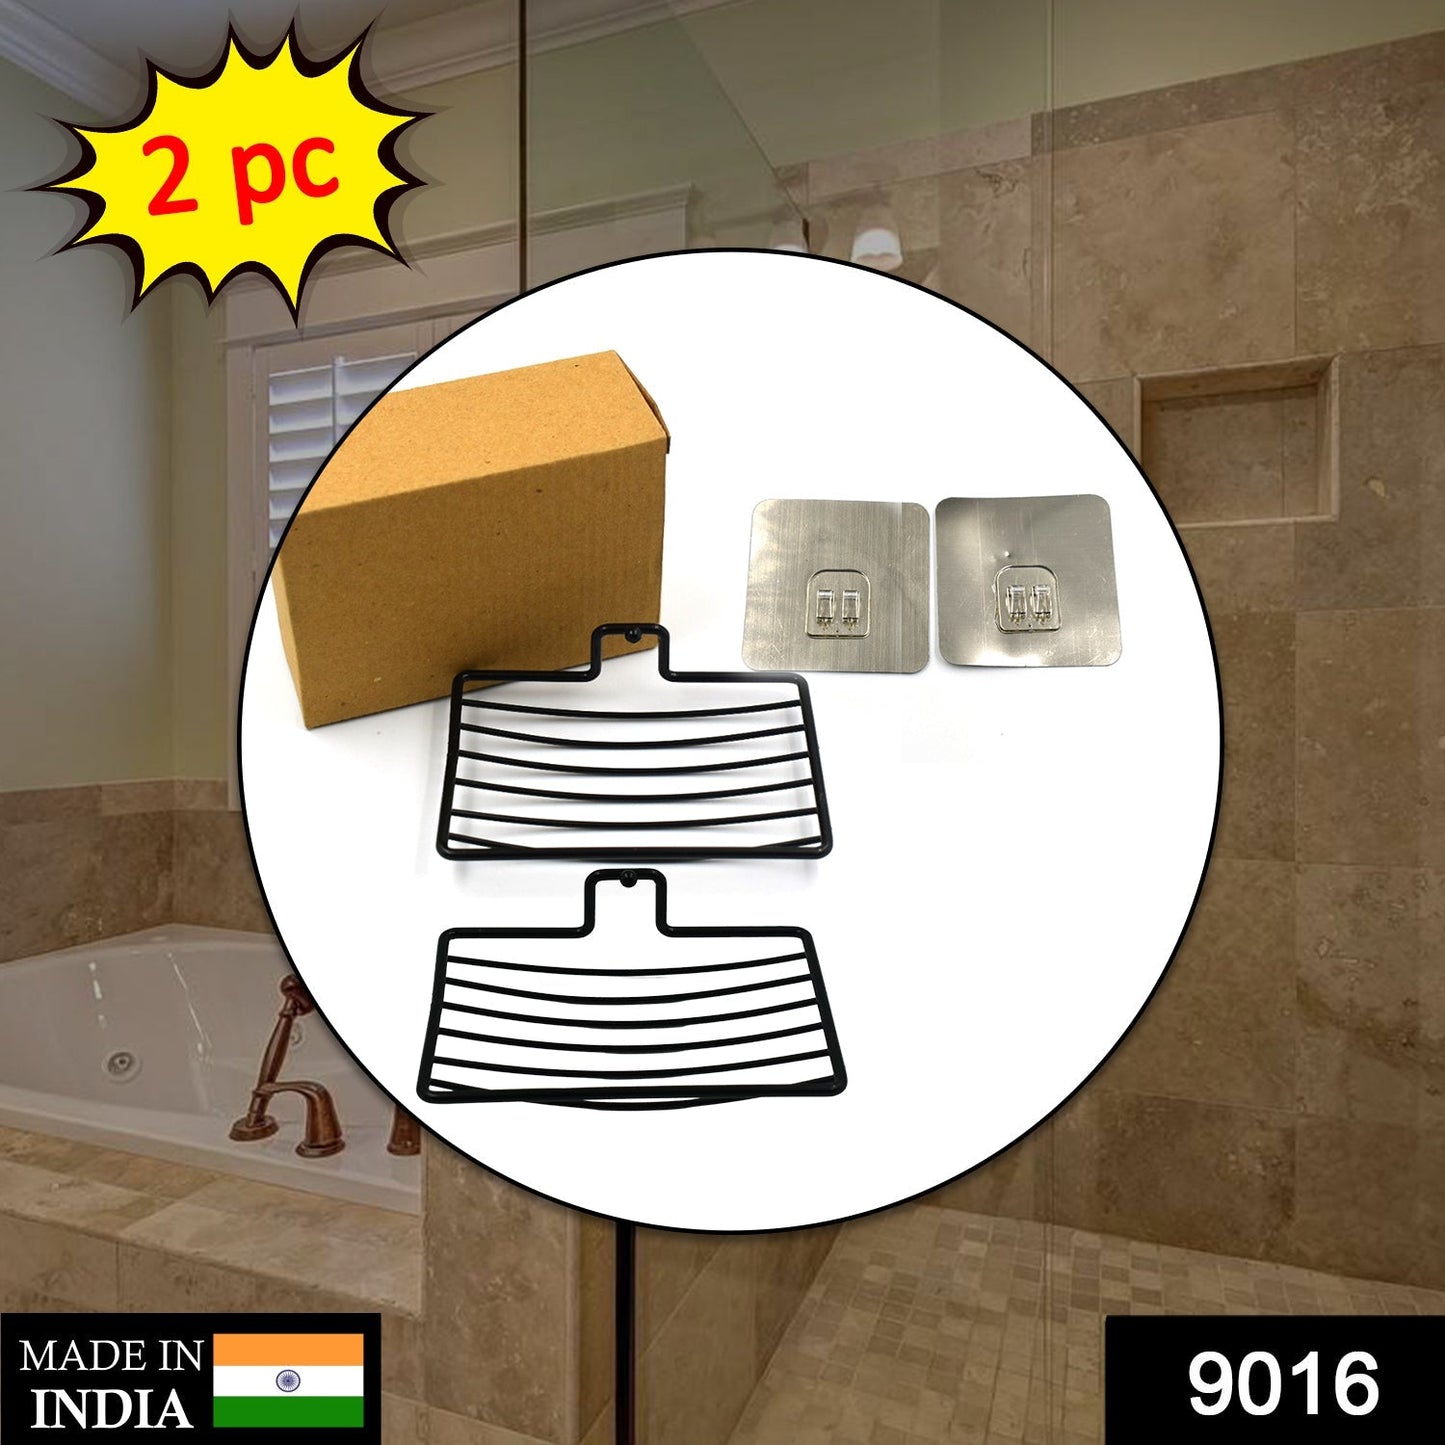 9016 Wall M 2 Pc Soap Rack used in all kinds of places household and bathroom purposes for holding soaps.